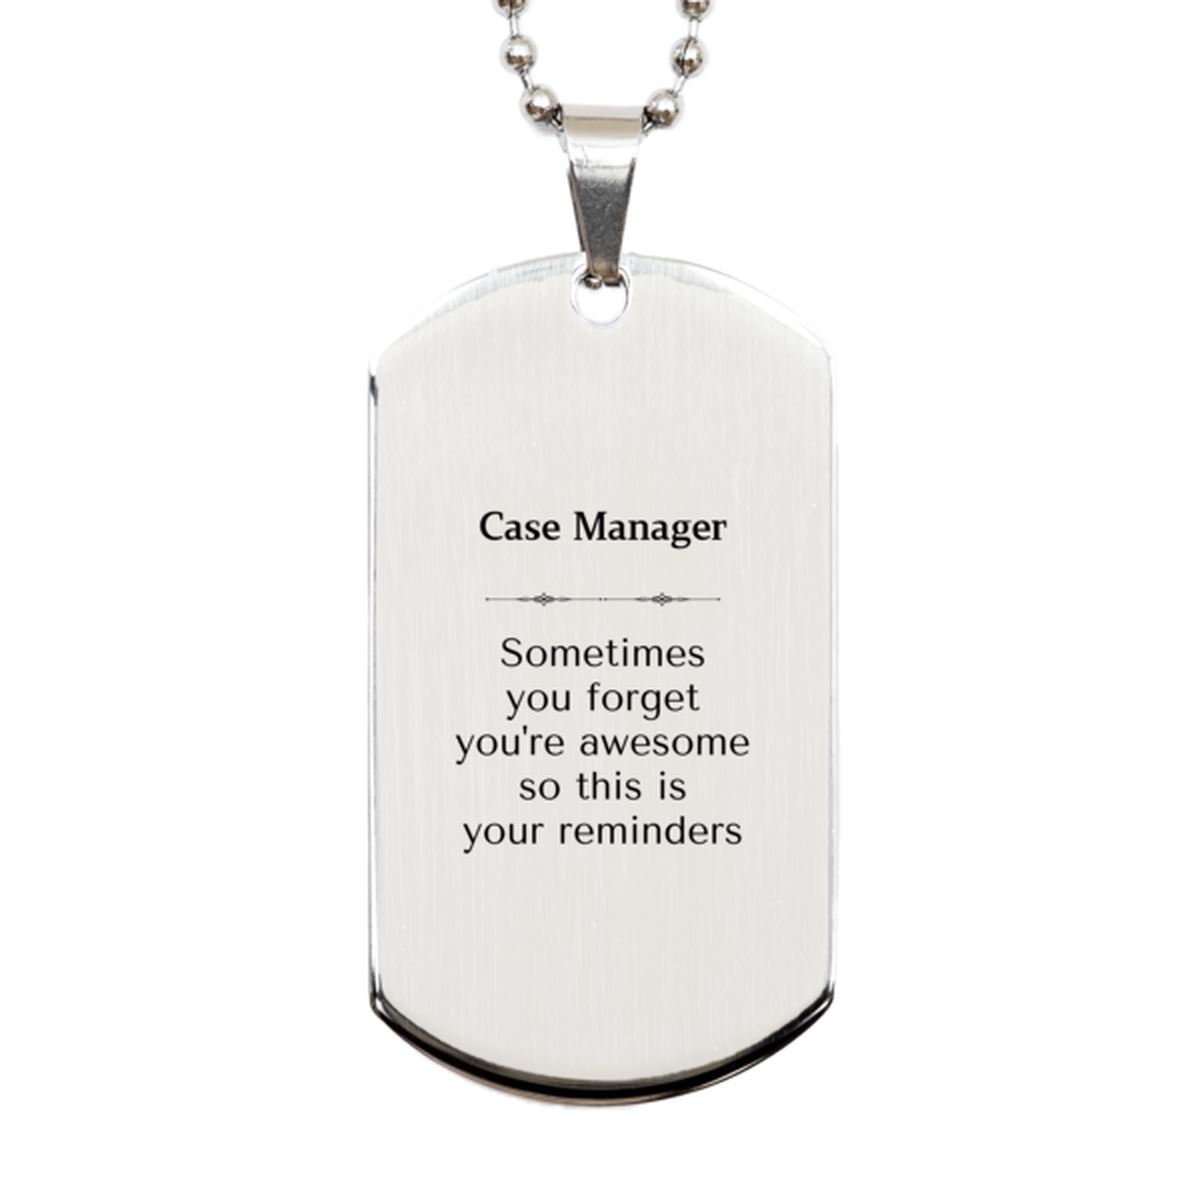 Sentimental Case Manager Silver Dog Tag, Case Manager Sometimes you forget you're awesome so this is your reminders, Graduation Christmas Birthday Gifts for Case Manager, Men, Women, Coworkers